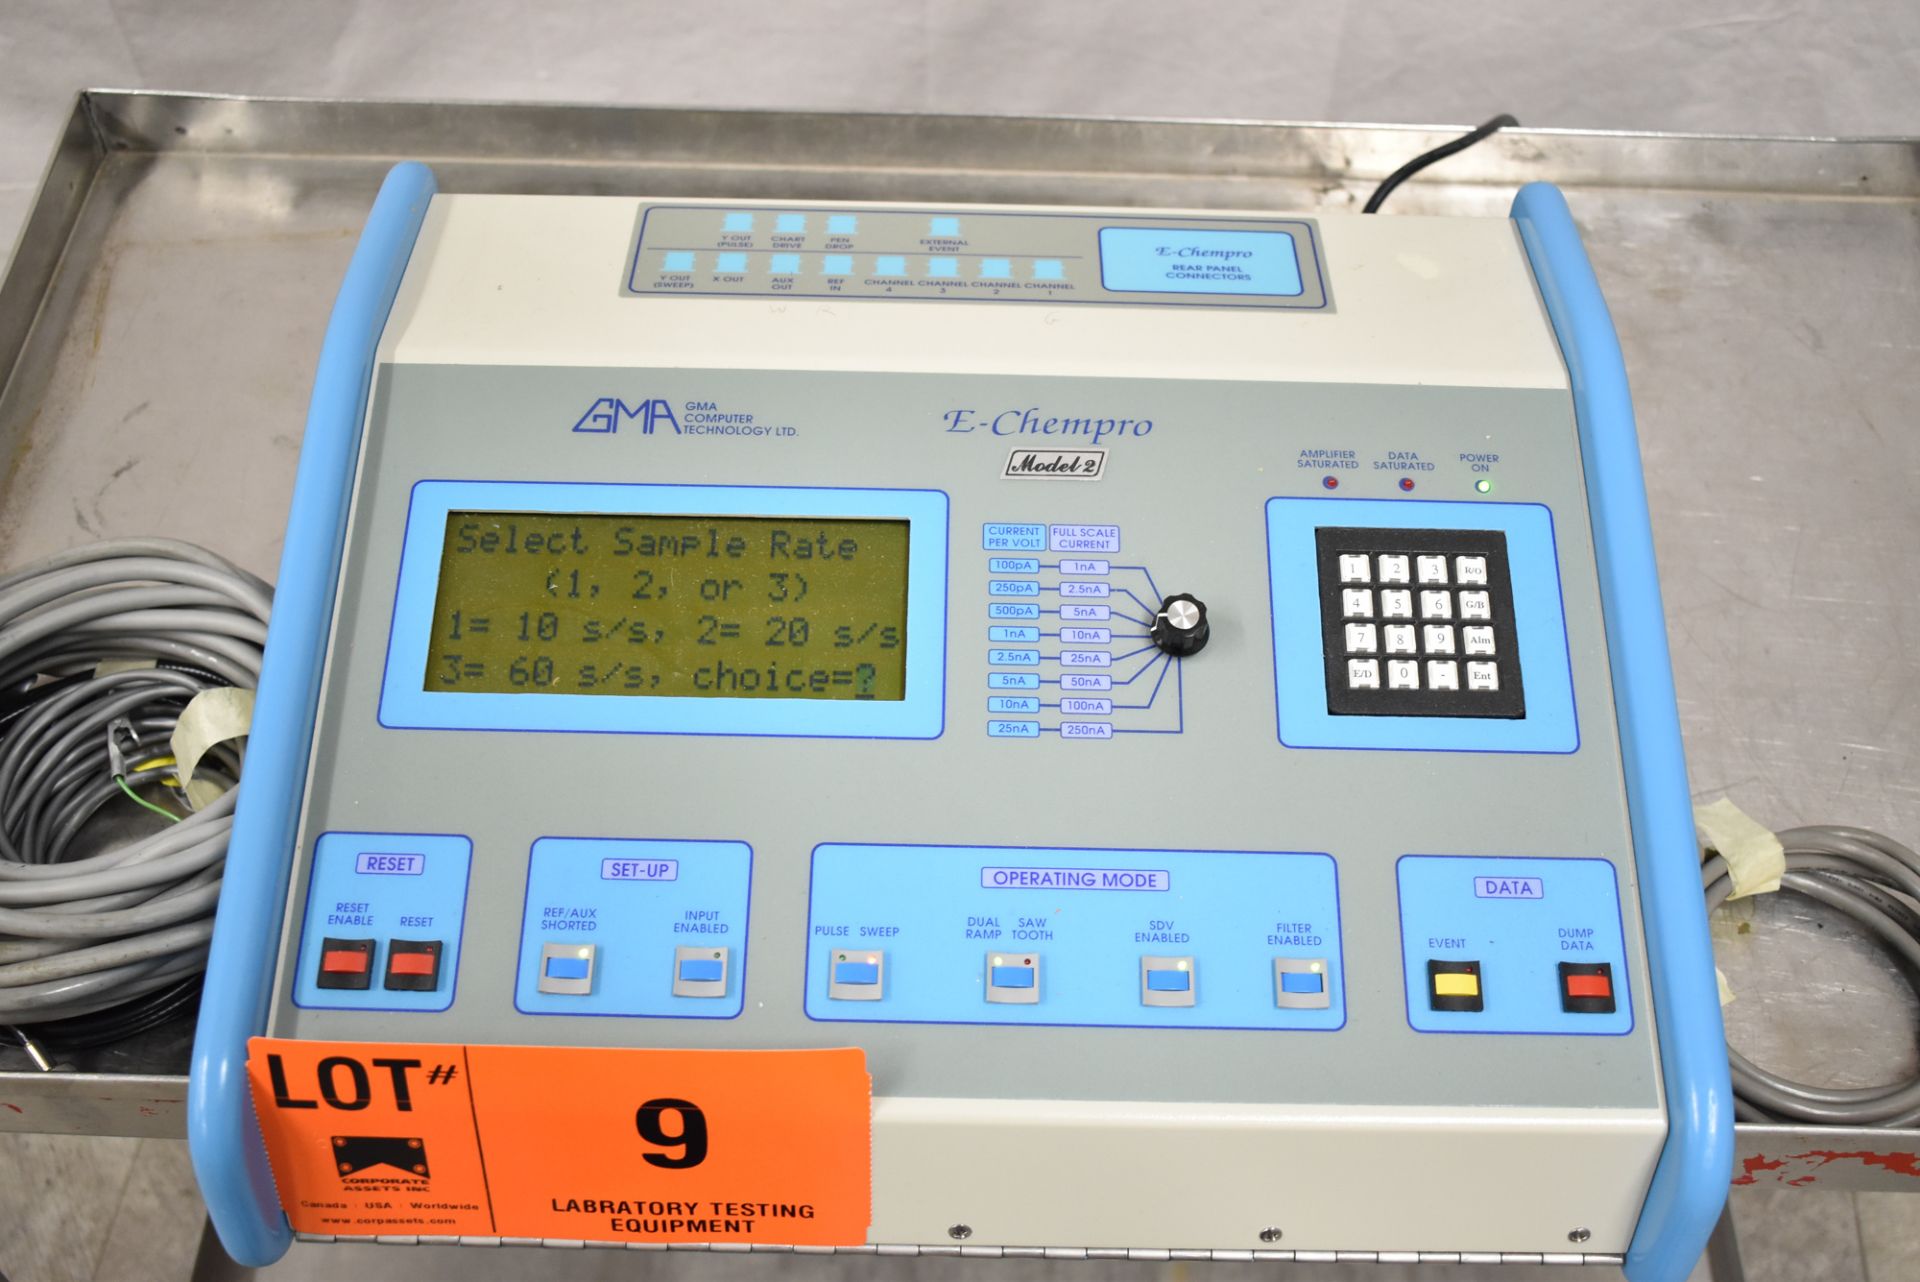 GMA E-CHEMPRO 2/110/60 HIGH SPEED SAMPLER WITH ATEN UC-232A USB TO SERIAL CONVERTER, S/N: 0026 [$